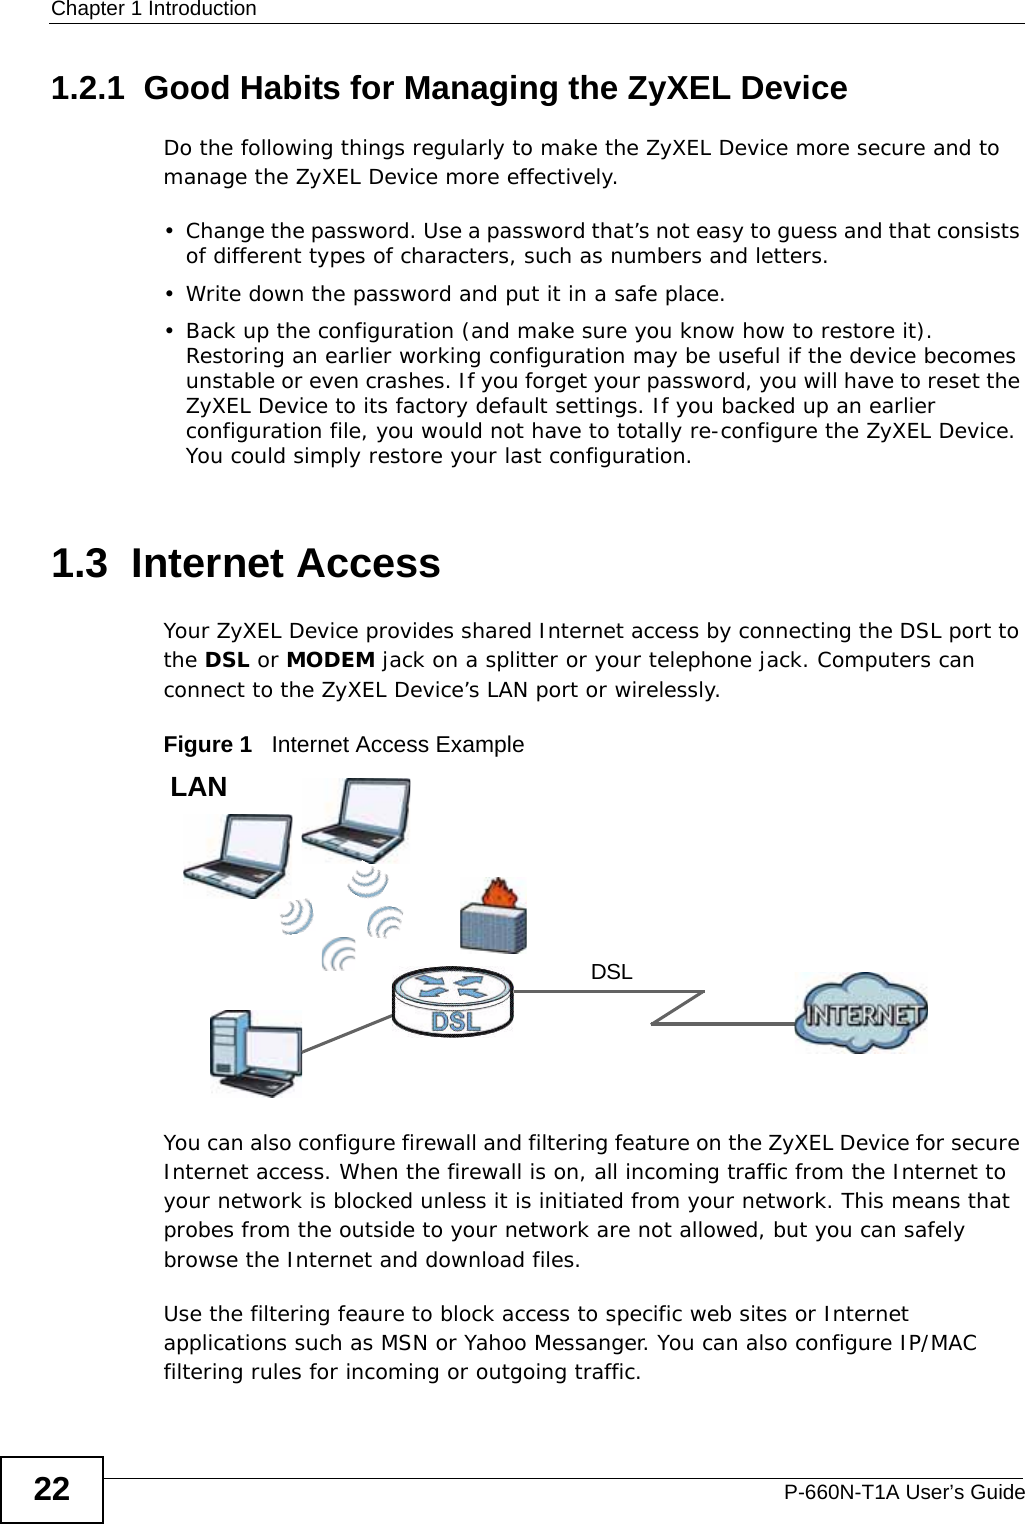 Chapter 1 IntroductionP-660N-T1A User’s Guide221.2.1  Good Habits for Managing the ZyXEL DeviceDo the following things regularly to make the ZyXEL Device more secure and to manage the ZyXEL Device more effectively.• Change the password. Use a password that’s not easy to guess and that consists of different types of characters, such as numbers and letters.• Write down the password and put it in a safe place.• Back up the configuration (and make sure you know how to restore it). Restoring an earlier working configuration may be useful if the device becomes unstable or even crashes. If you forget your password, you will have to reset the ZyXEL Device to its factory default settings. If you backed up an earlier configuration file, you would not have to totally re-configure the ZyXEL Device. You could simply restore your last configuration.1.3  Internet AccessYour ZyXEL Device provides shared Internet access by connecting the DSL port to the DSL or MODEM jack on a splitter or your telephone jack. Computers can connect to the ZyXEL Device’s LAN port or wirelessly.Figure 1   Internet Access ExampleYou can also configure firewall and filtering feature on the ZyXEL Device for secure Internet access. When the firewall is on, all incoming traffic from the Internet to your network is blocked unless it is initiated from your network. This means that probes from the outside to your network are not allowed, but you can safely browse the Internet and download files.Use the filtering feaure to block access to specific web sites or Internet applications such as MSN or Yahoo Messanger. You can also configure IP/MAC filtering rules for incoming or outgoing traffic.DSLLAN